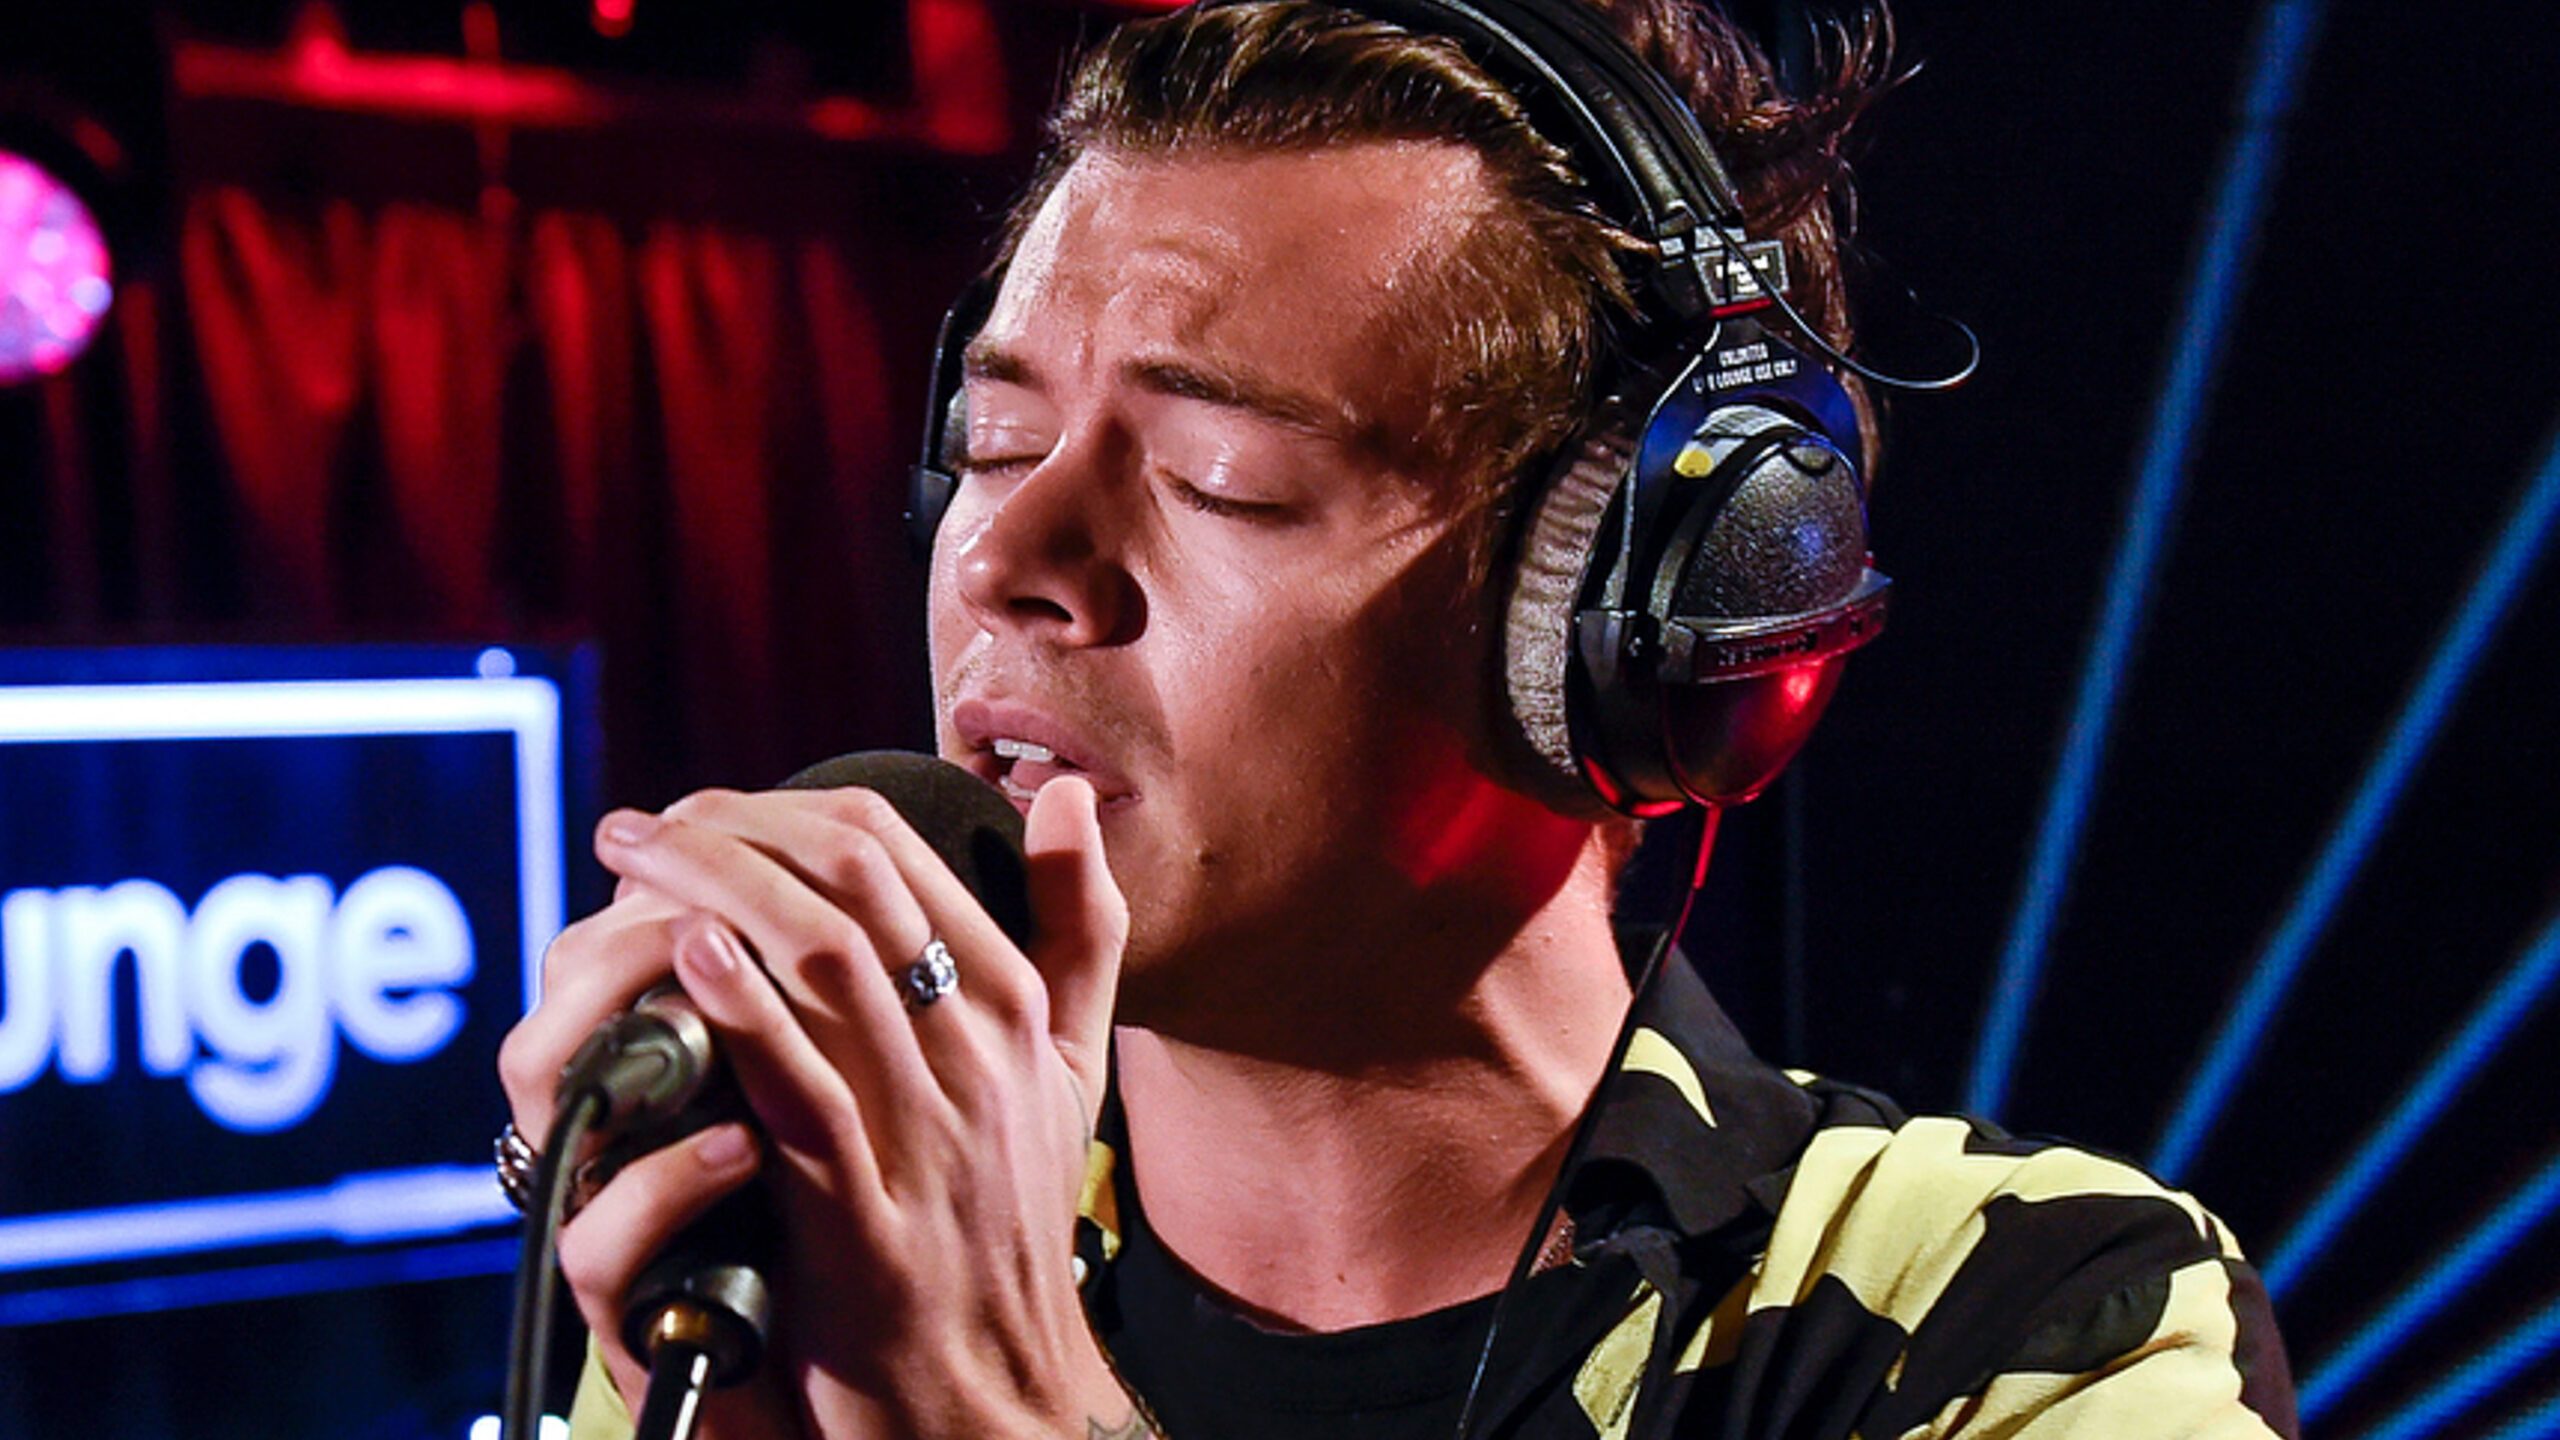 WATCH: Harry Styles covers another Fleetwood Mac classic